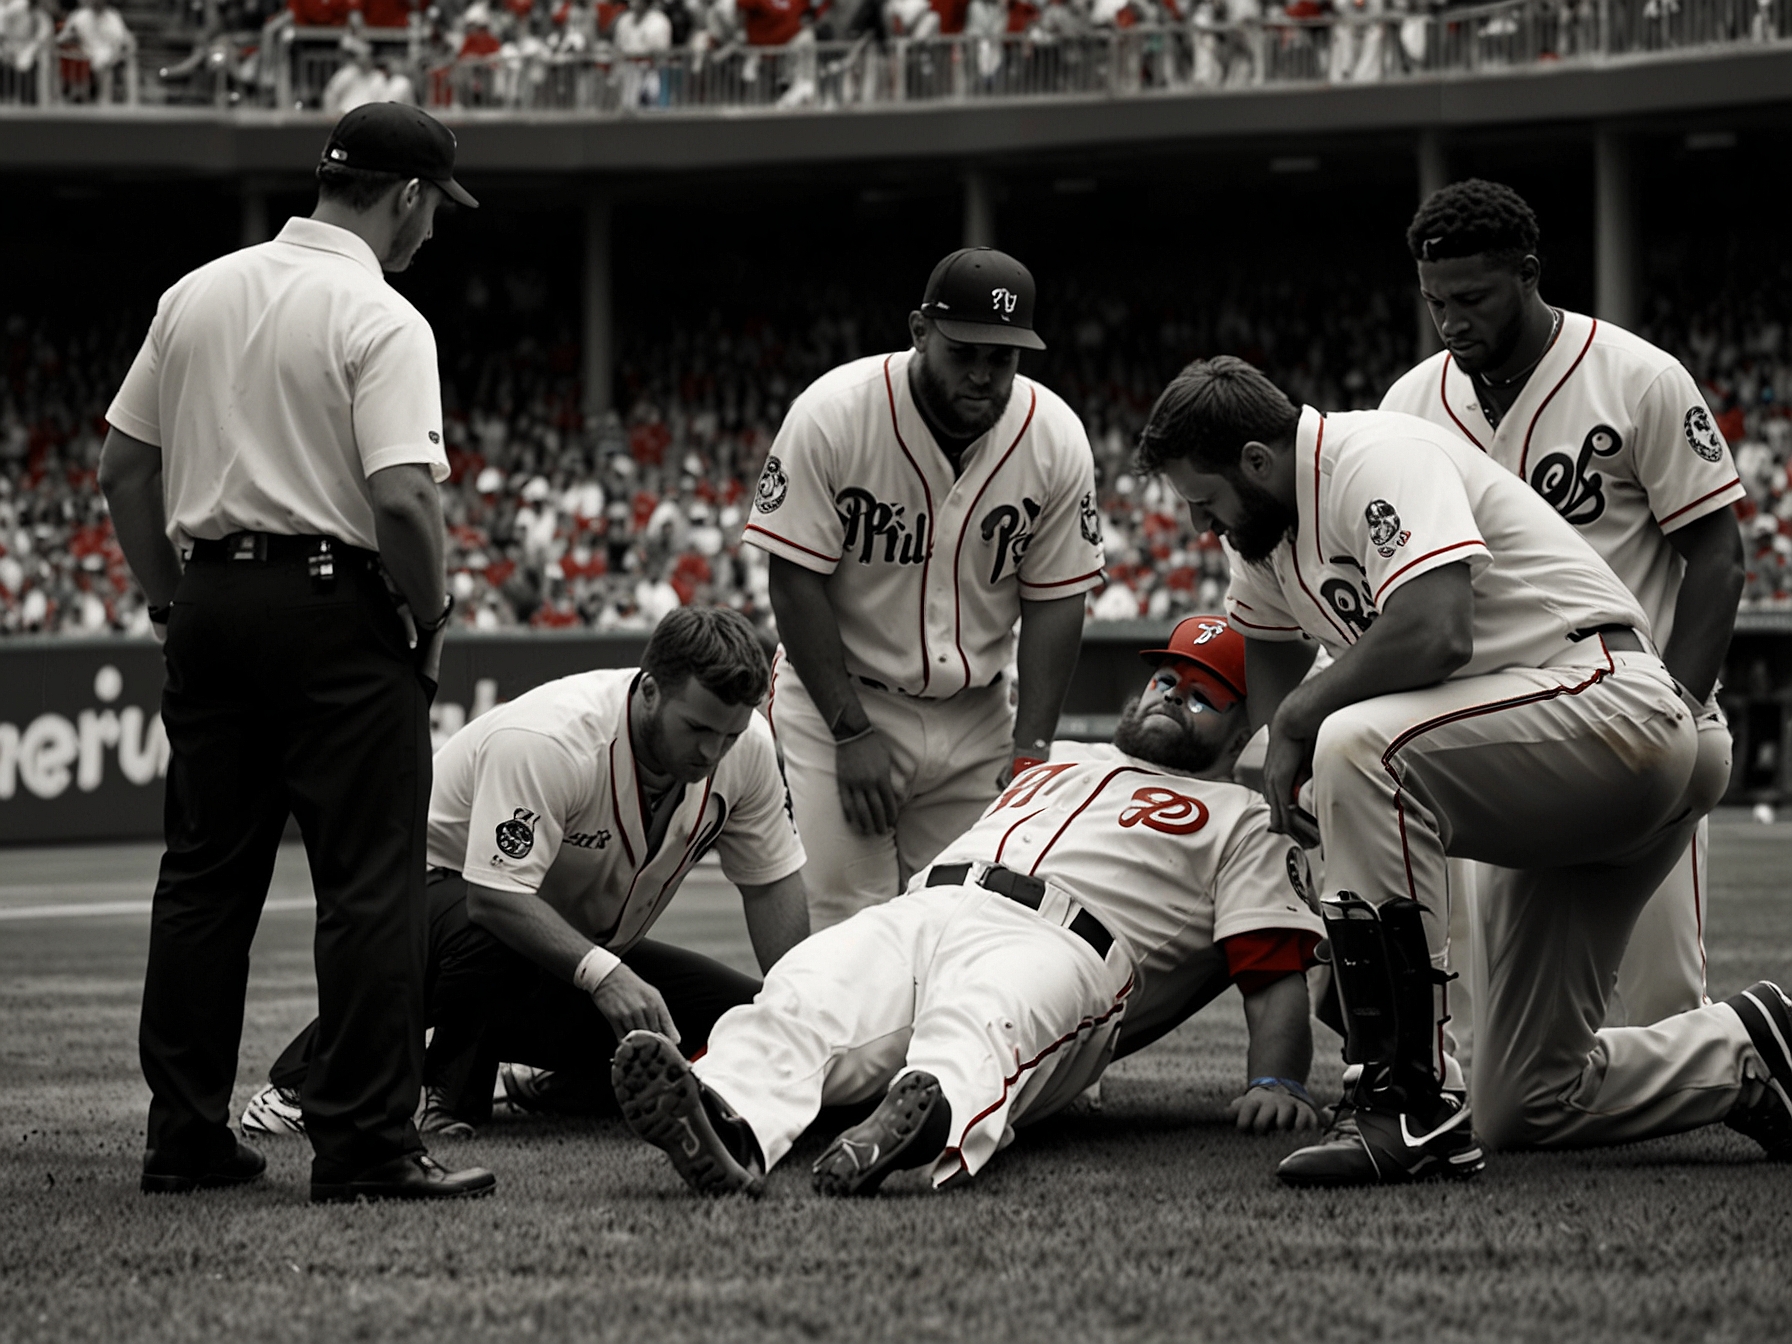 Bryce Harper lying on the field in visible pain while medical staff attends to him after suffering a hamstring injury during the final moments of the Phillies' game against the Marlins.